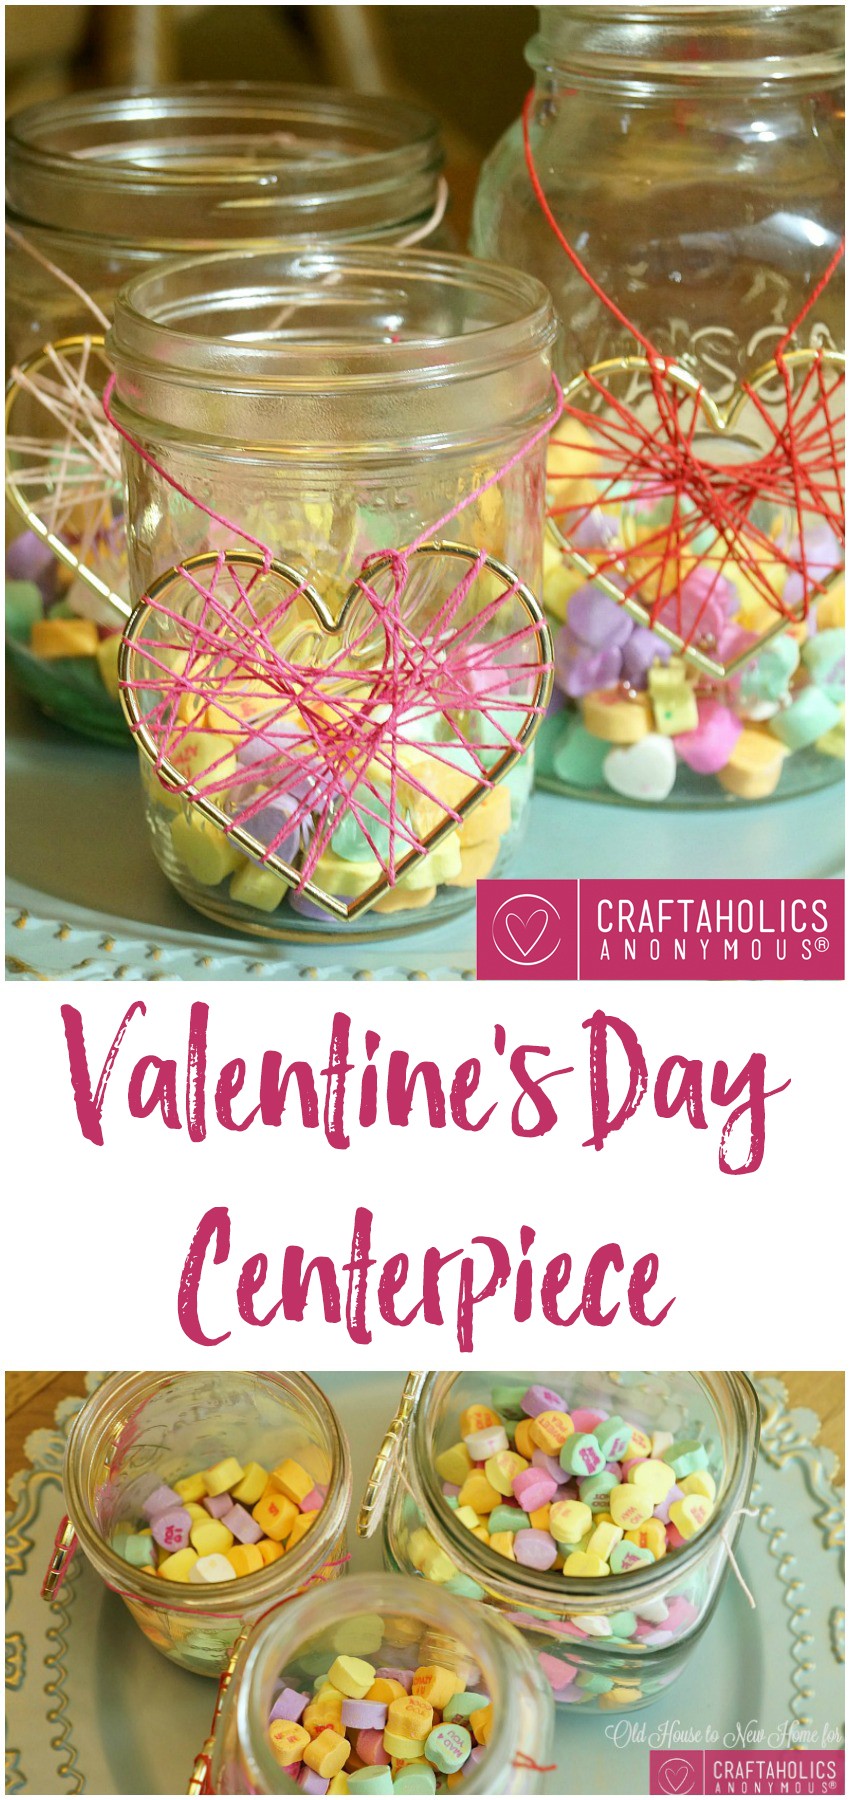 Valentine's Day Centerpiece at Craftaholics Anonymous